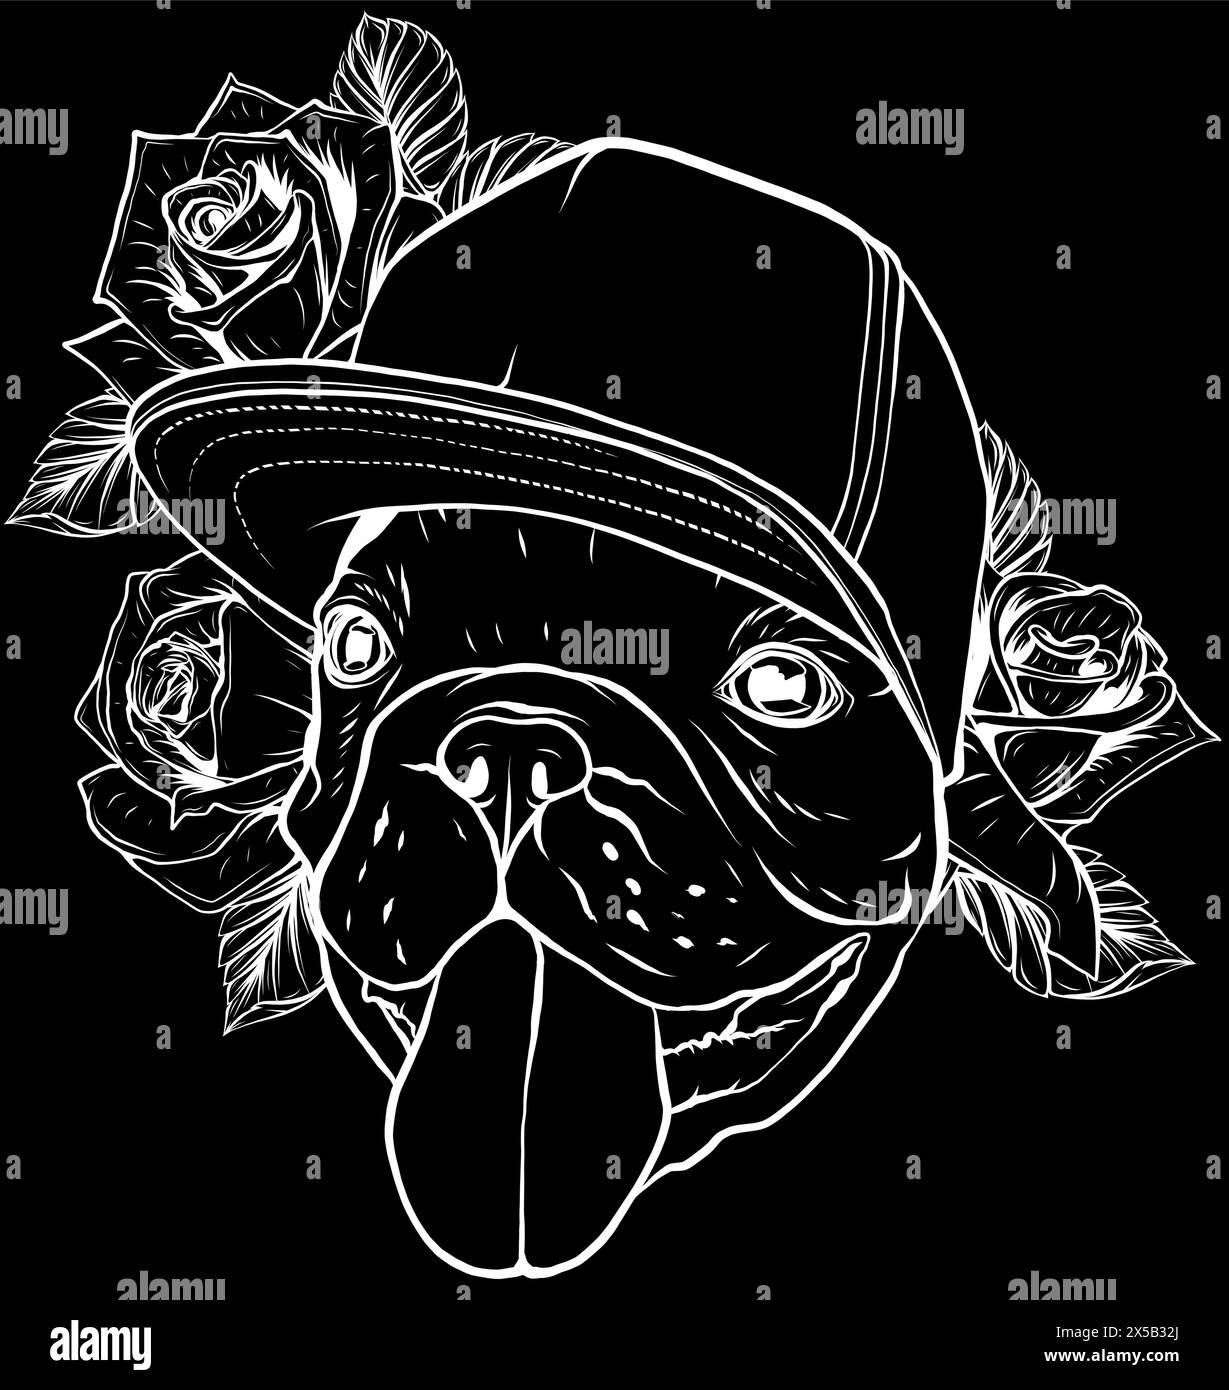 white silhouette of Portrait of a Pug dog in a Rose flower head wreath on black background. Vector illustration. Stock Vector